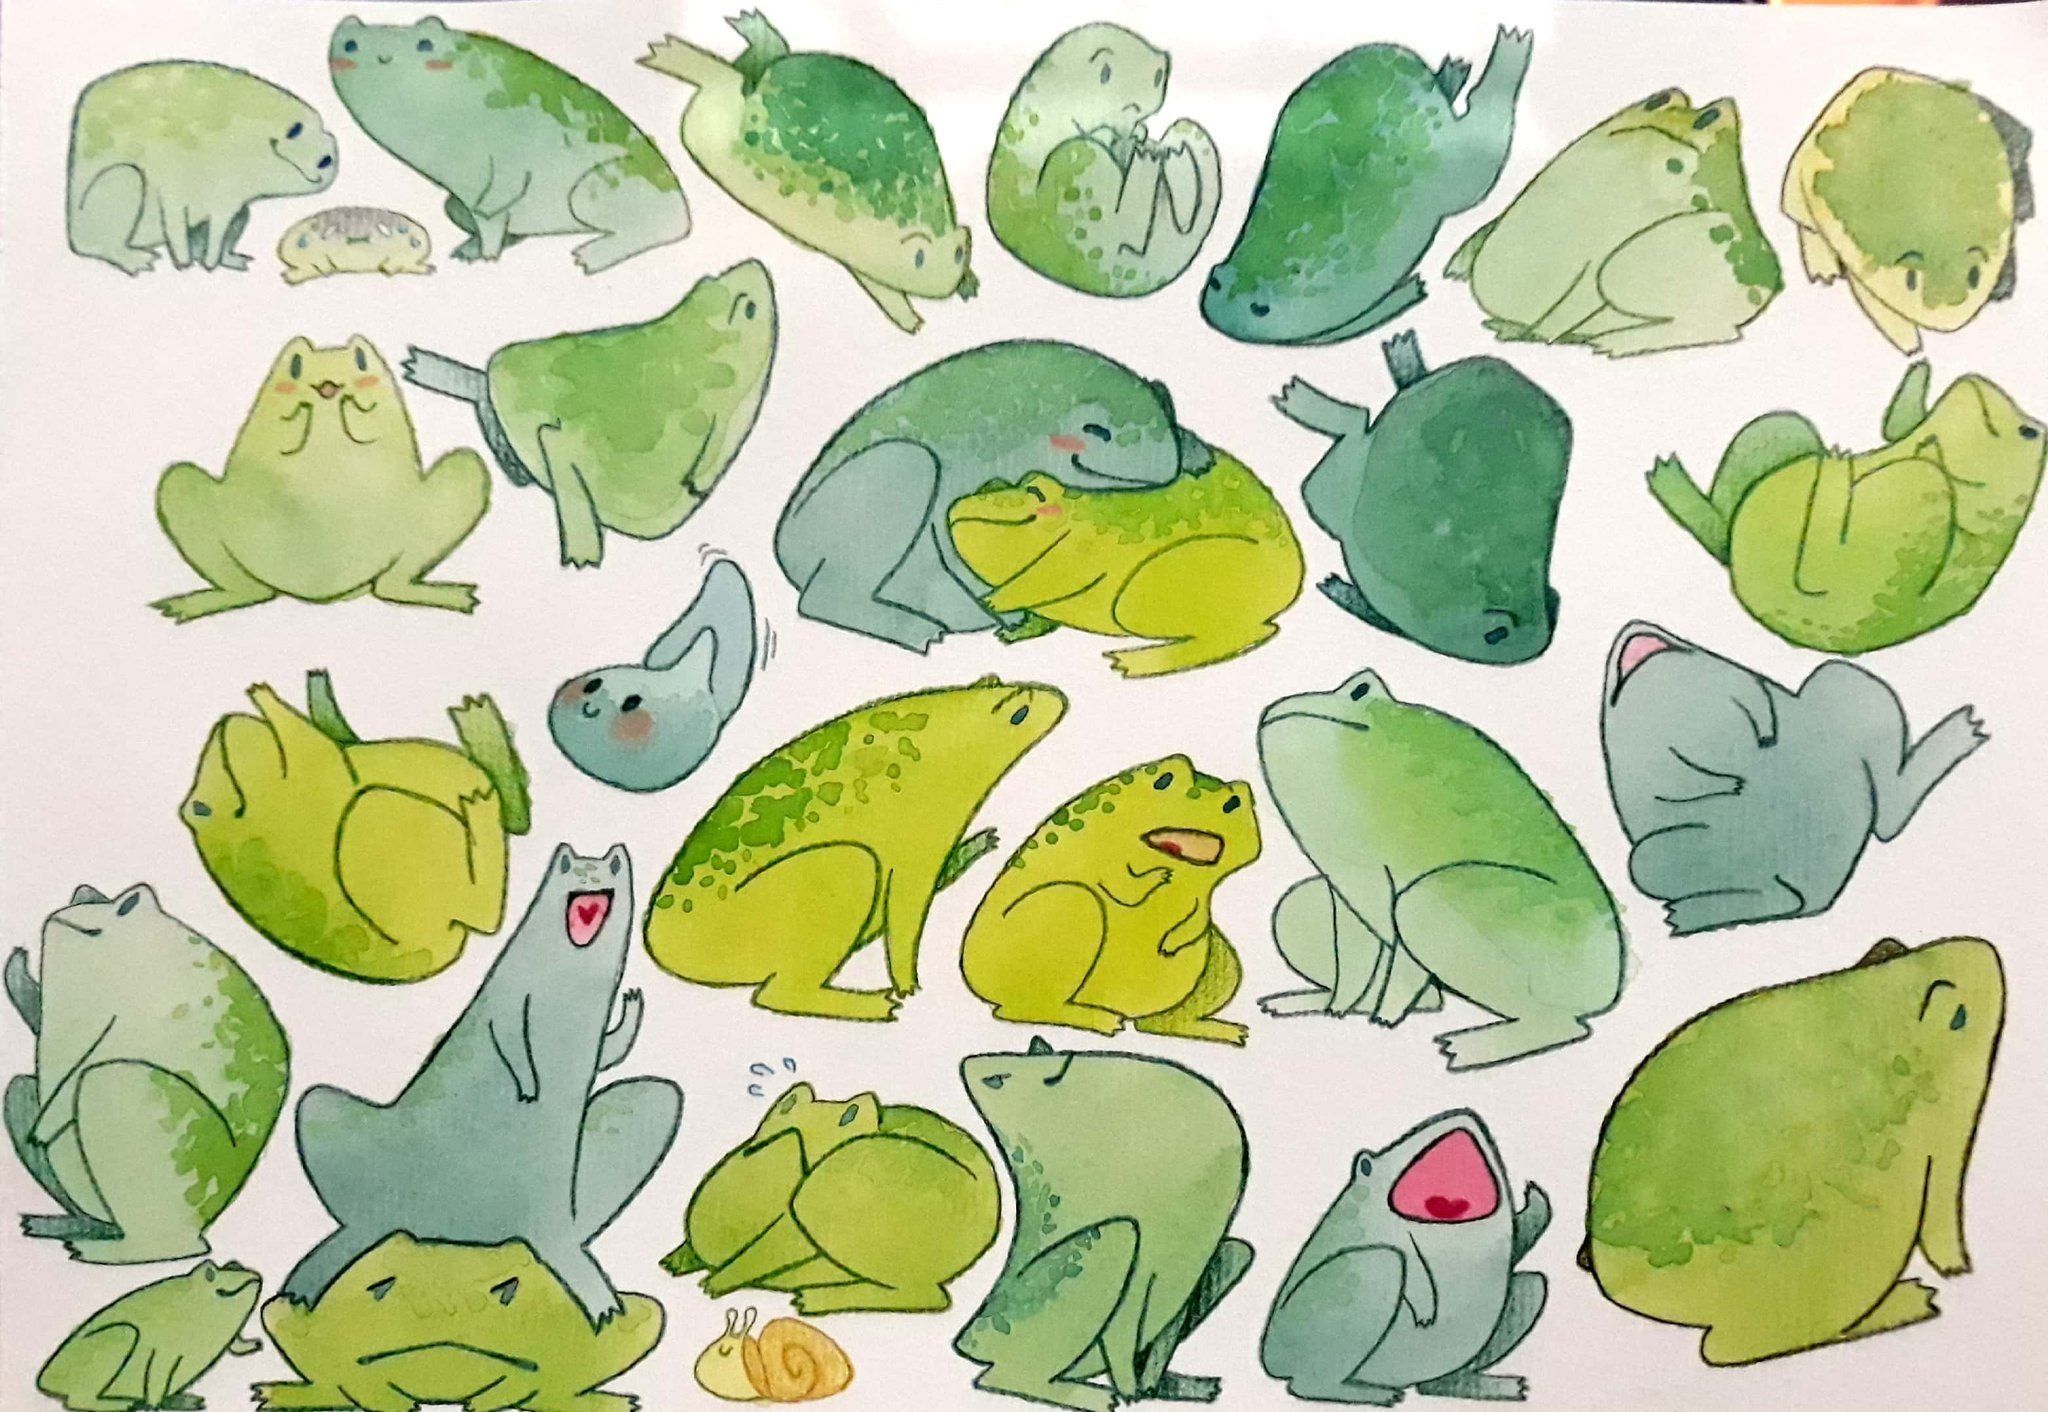 Cute Frog Drawing on the Wallpaper (46 photo) Drawings for sketching and not only